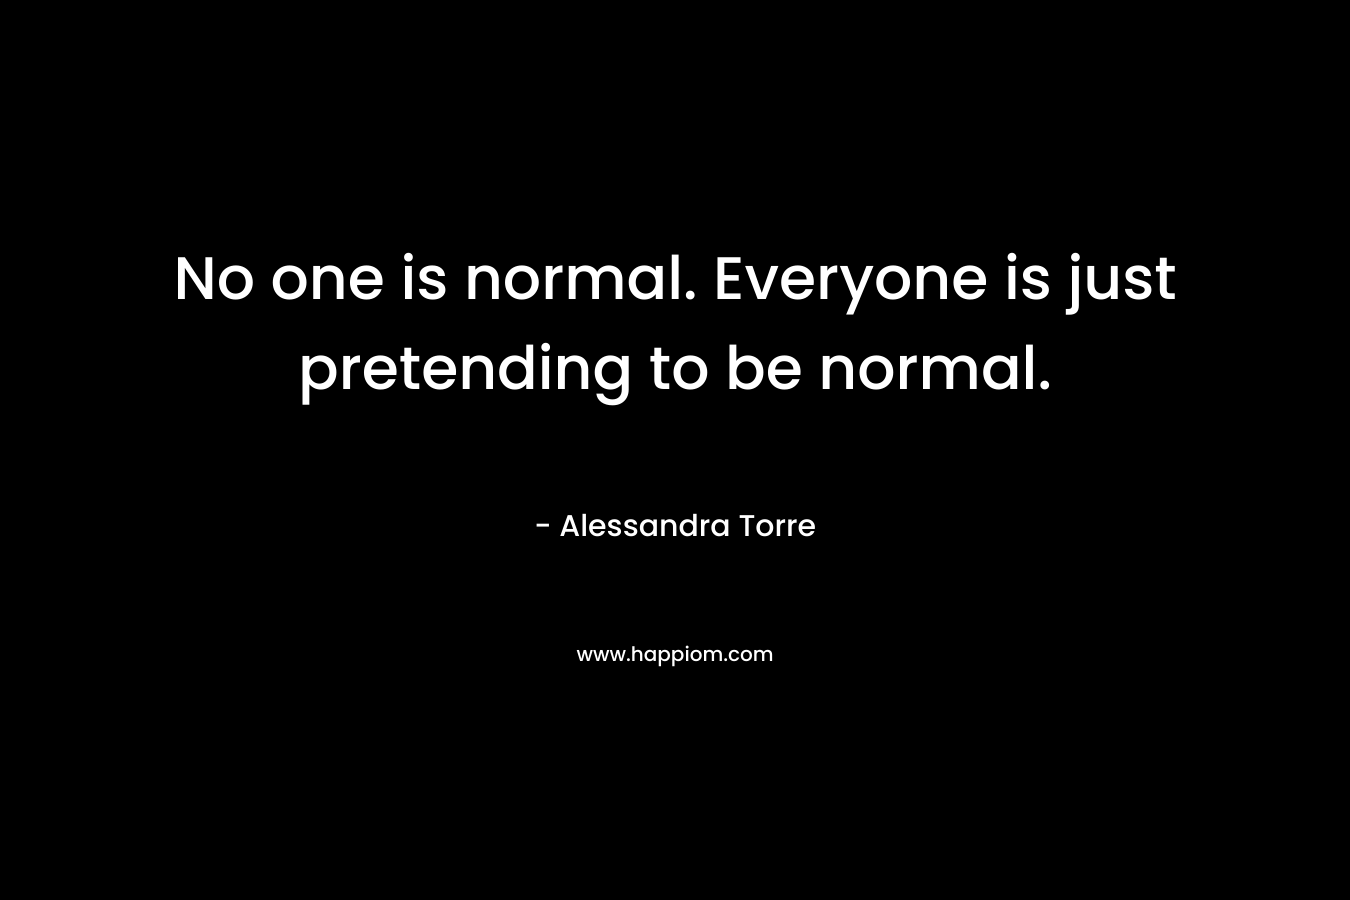 No one is normal. Everyone is just pretending to be normal. – Alessandra Torre